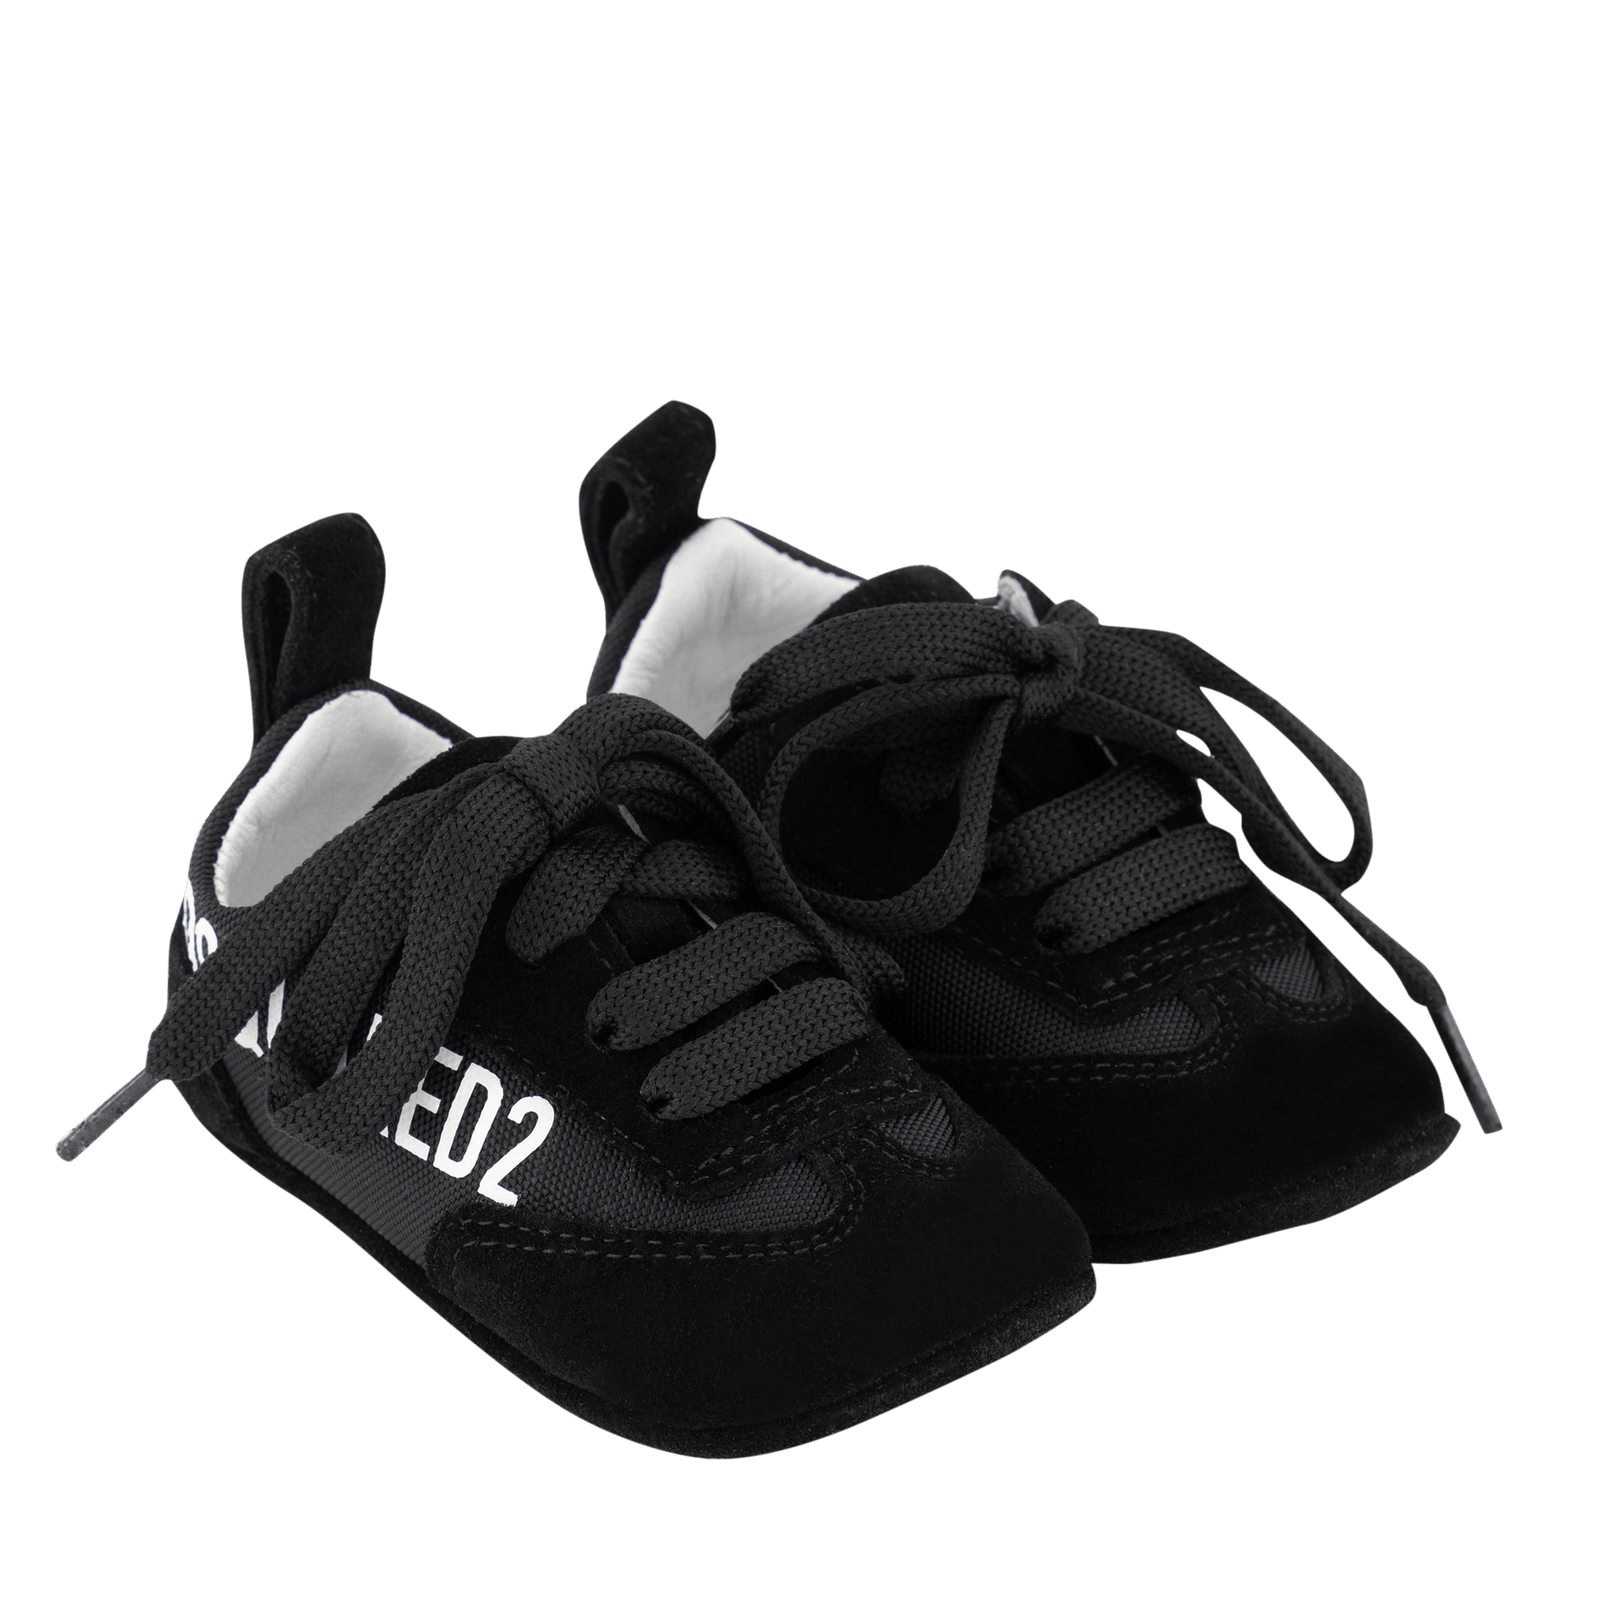 Dsquared2 Baby Unisex Sneakers Black